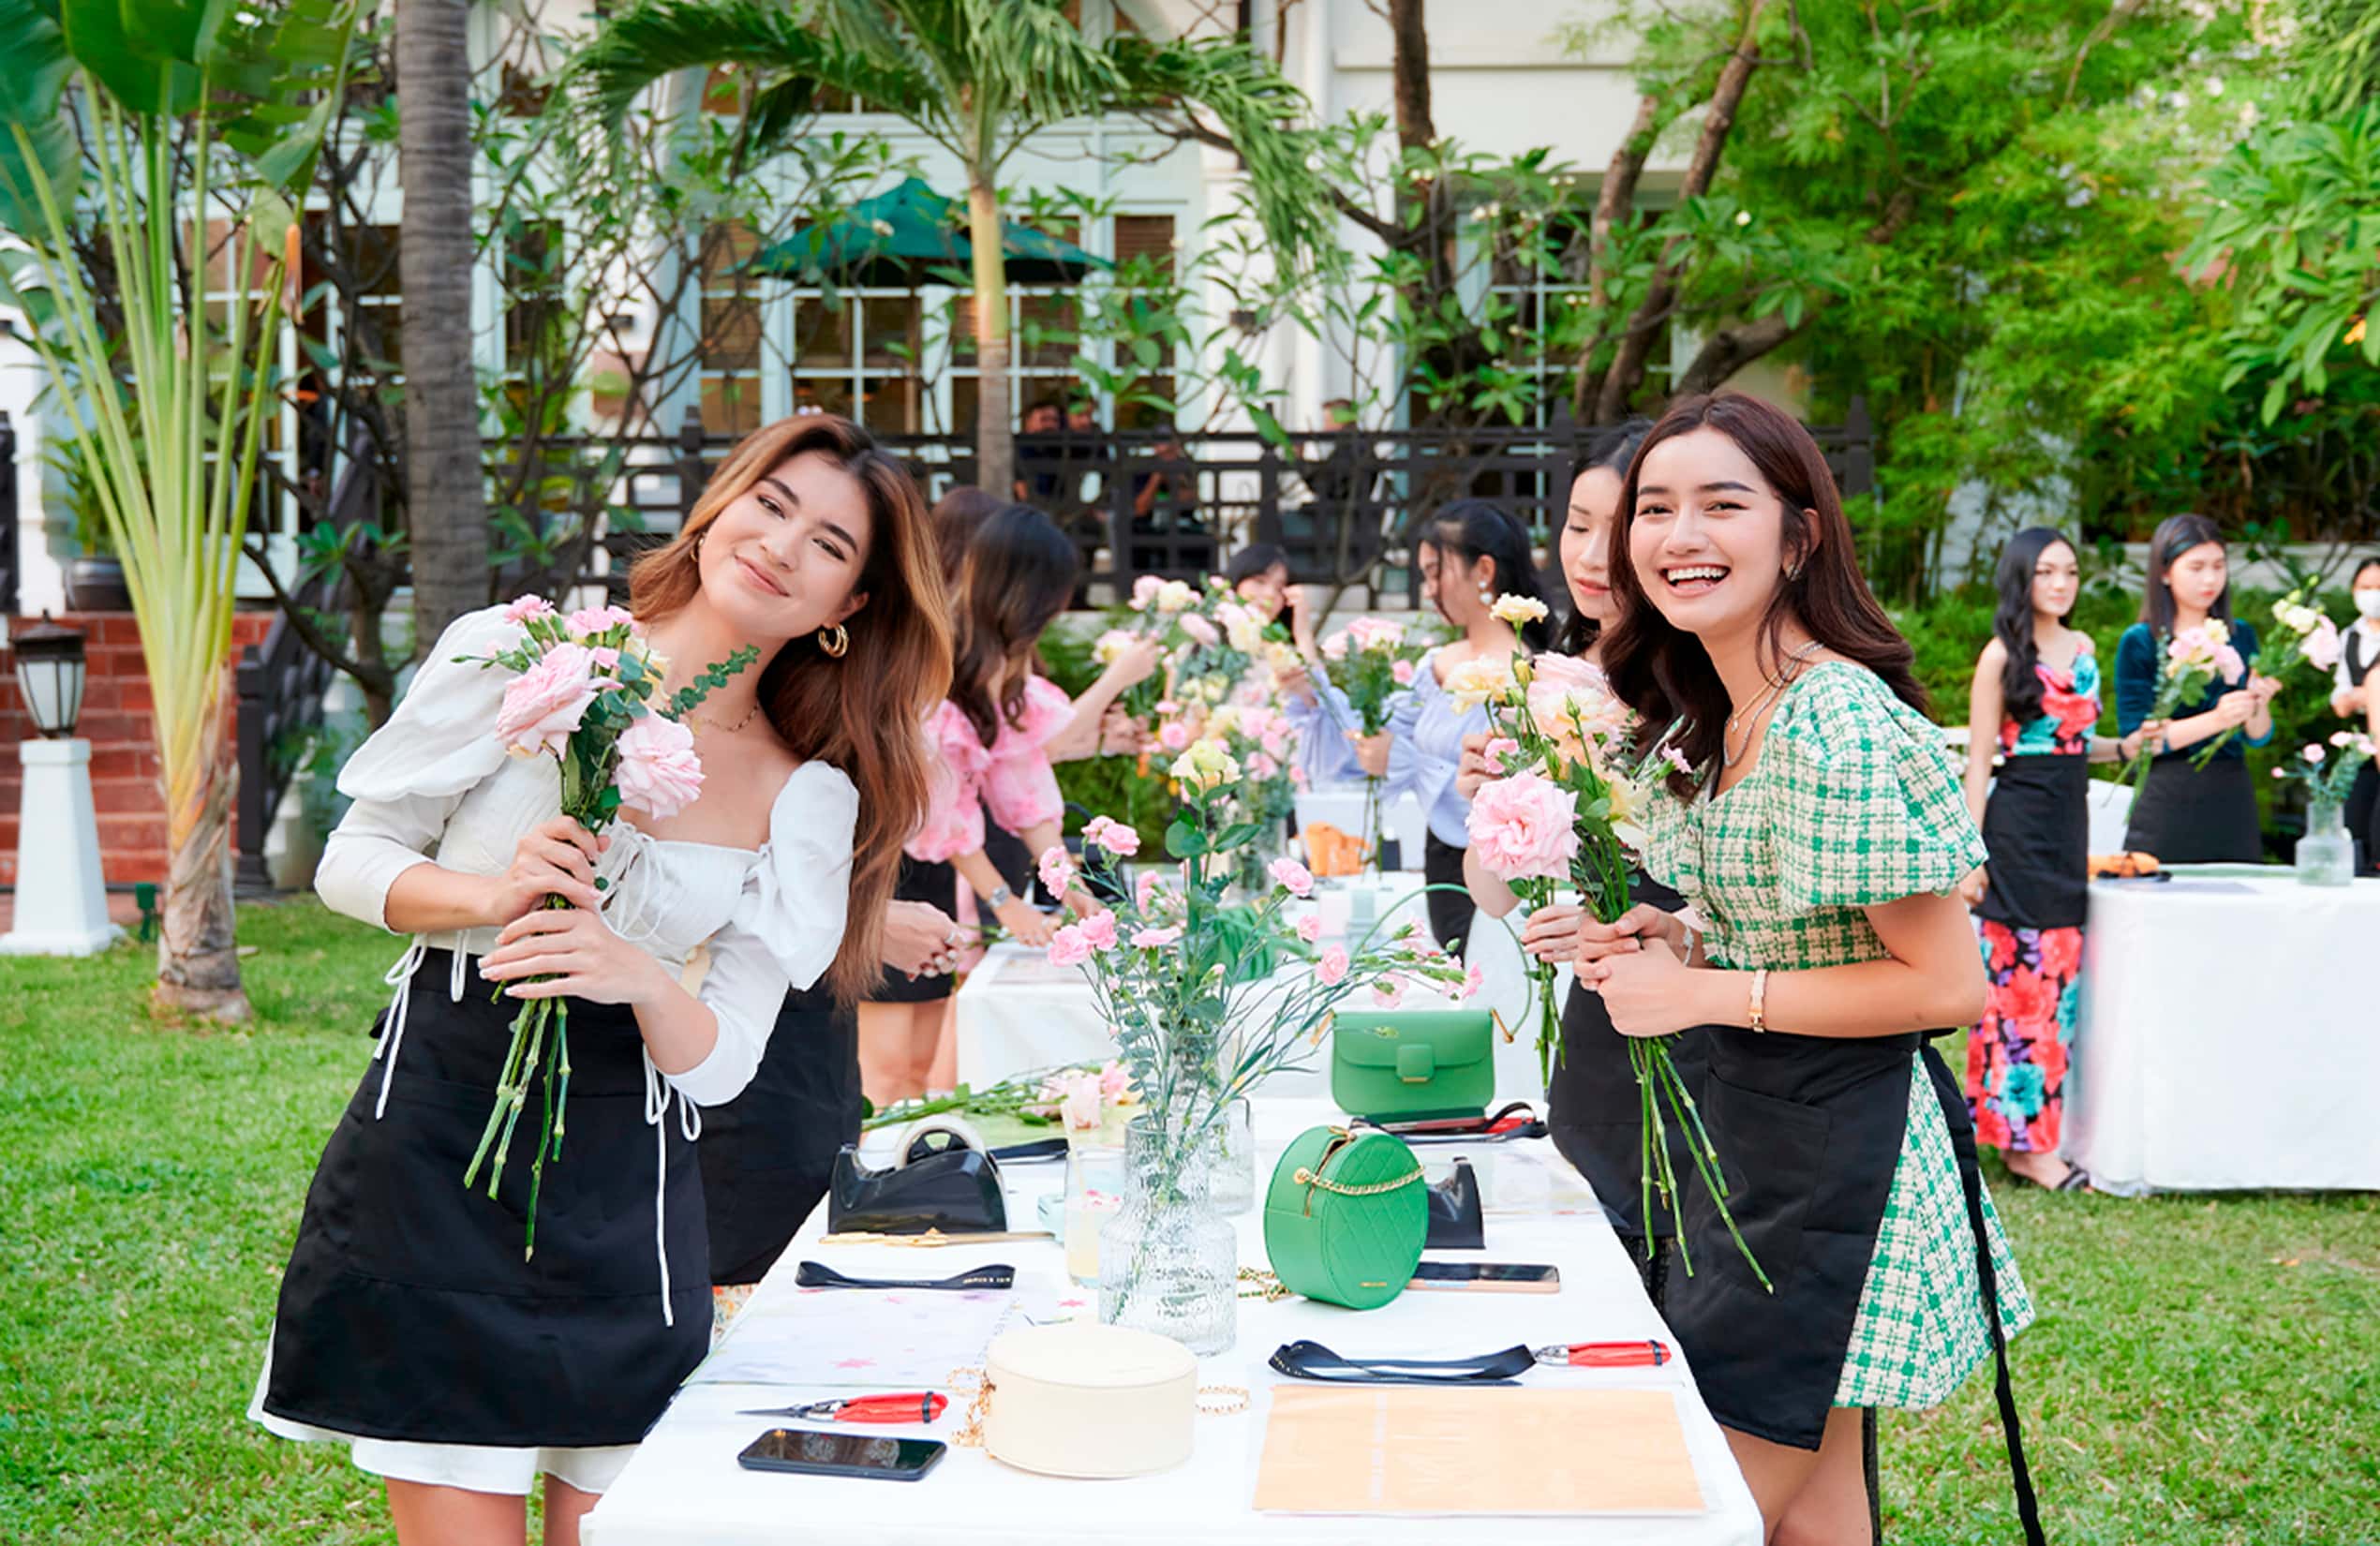 Flower arrangement workshop at CHARLES & KEITH’s ‘Blooming Spring’ event in Phnom Penh, Cambodia